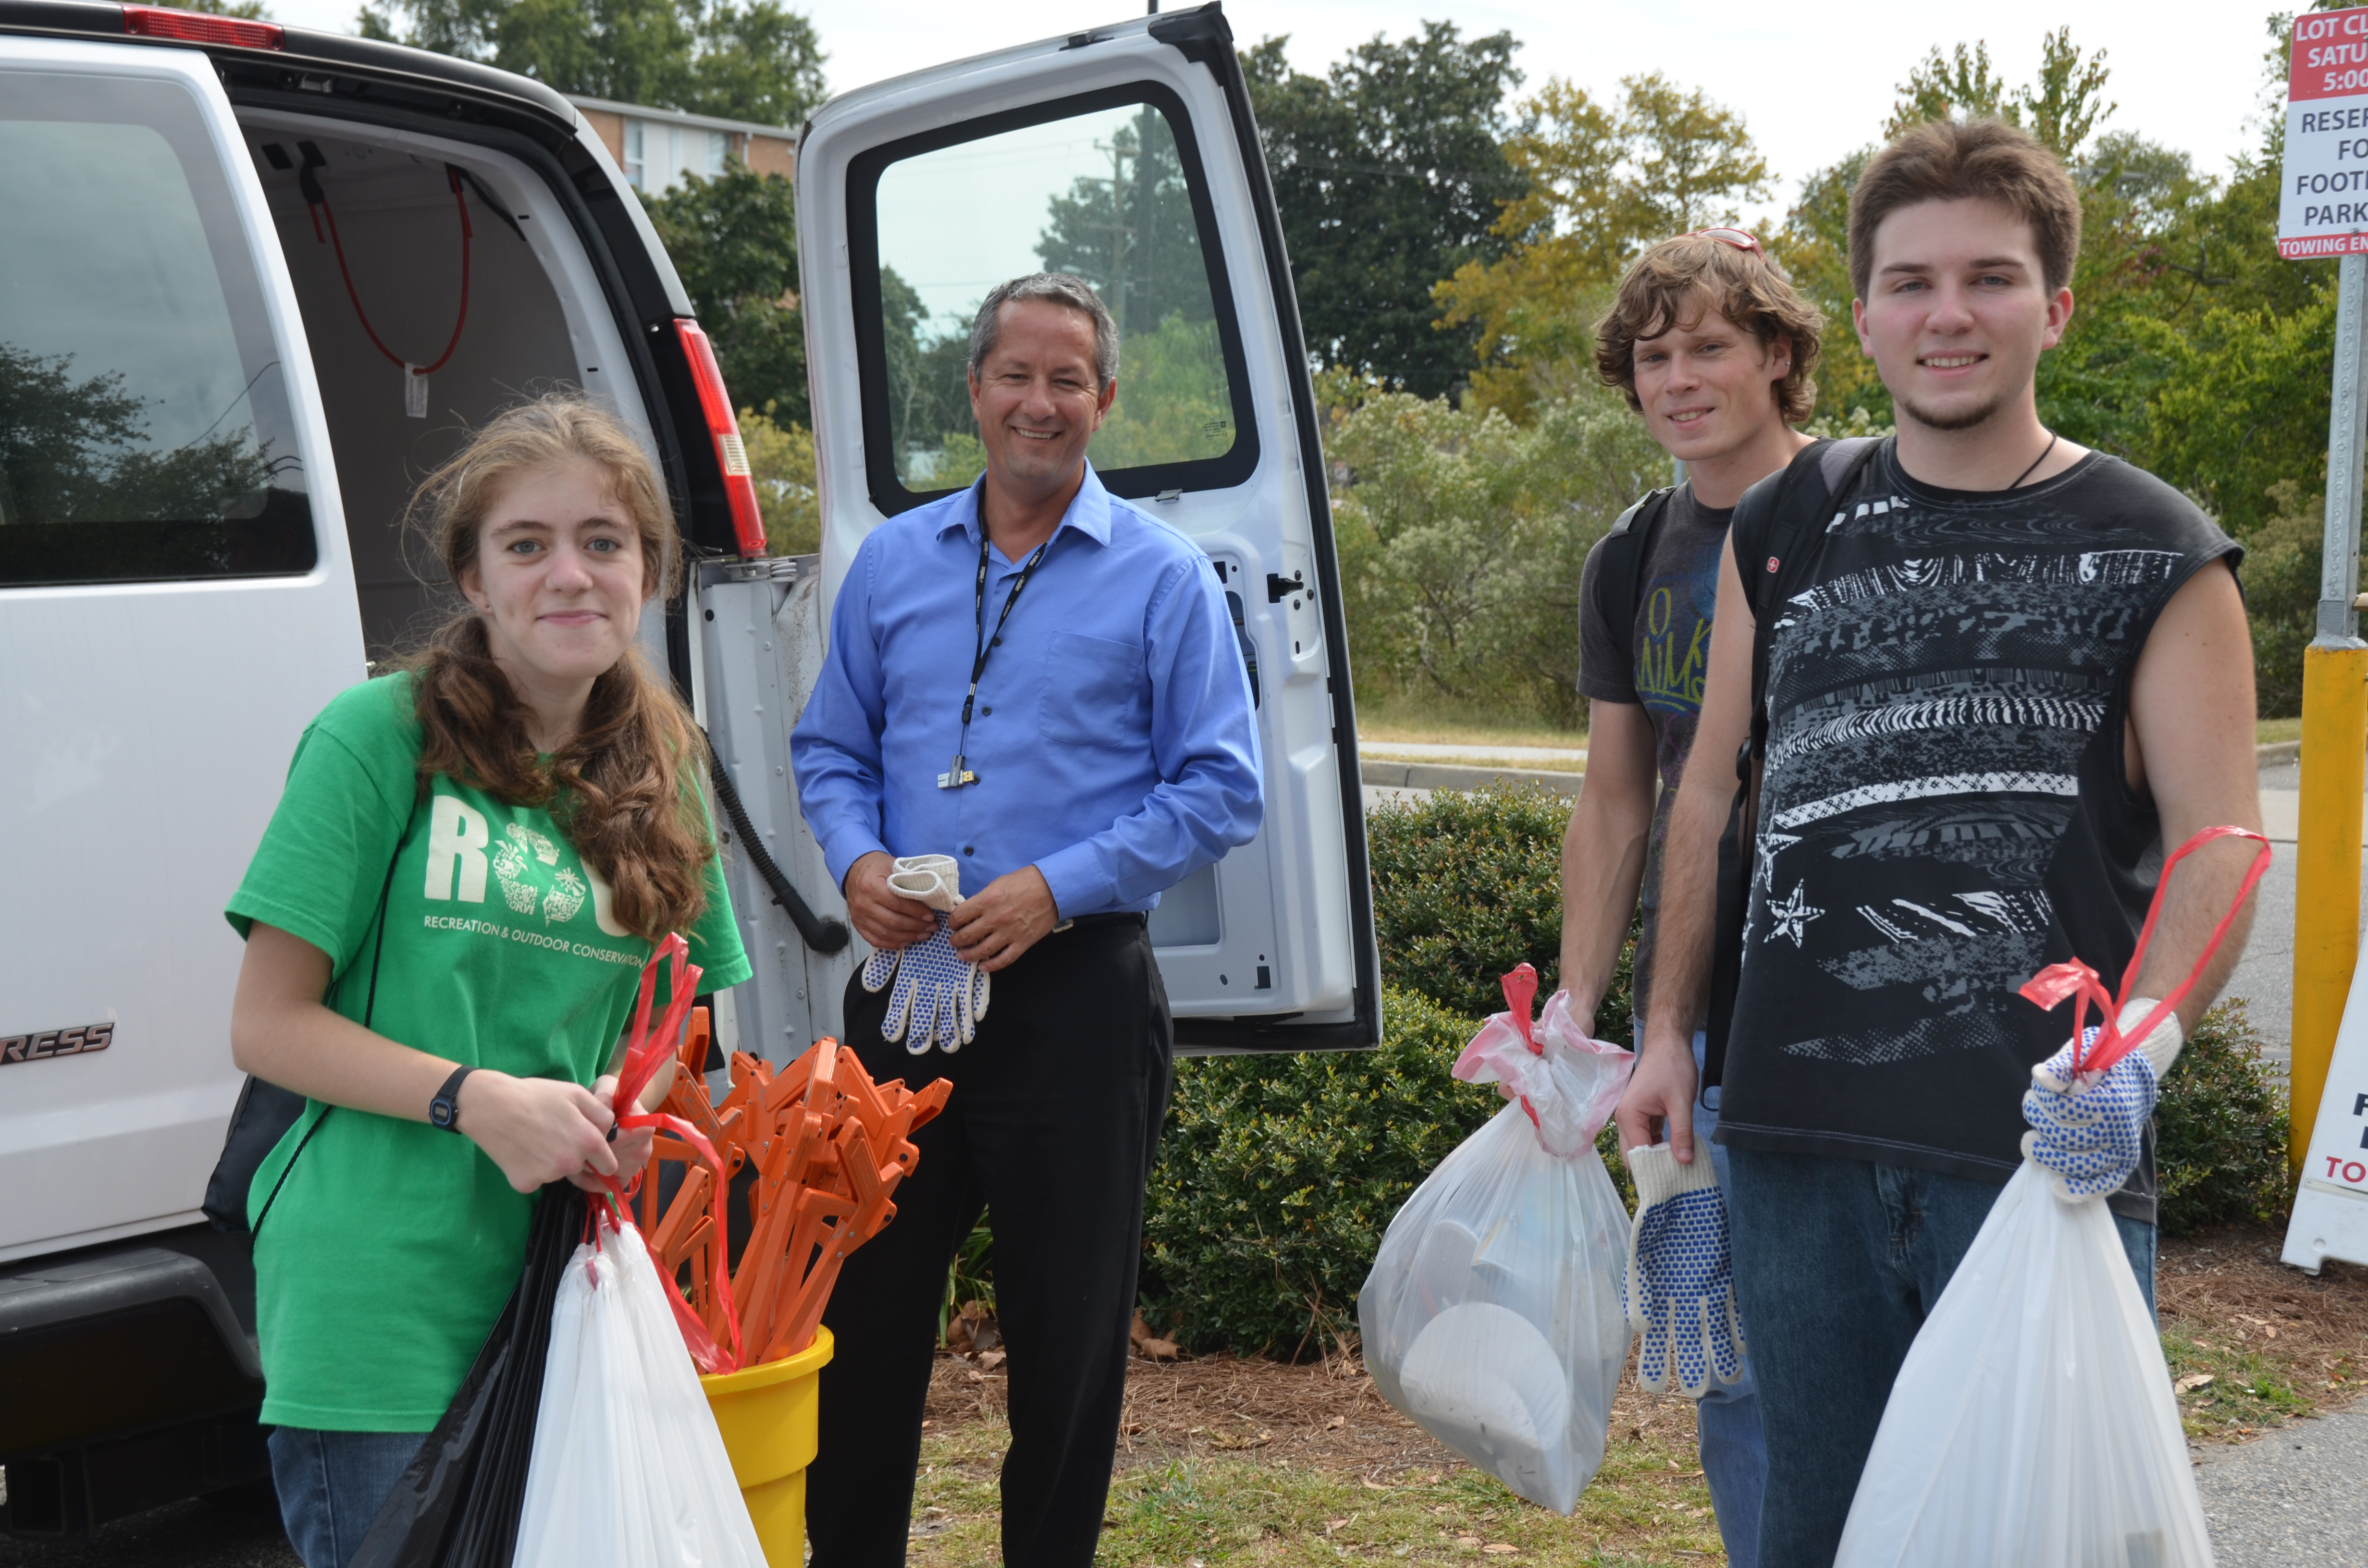 Doug Alexander, director of environmental health and safety, got some student help last week for a cleanup project along the Lafayette River shoreline behind Rogers Hall. Photo by Steve Daniel